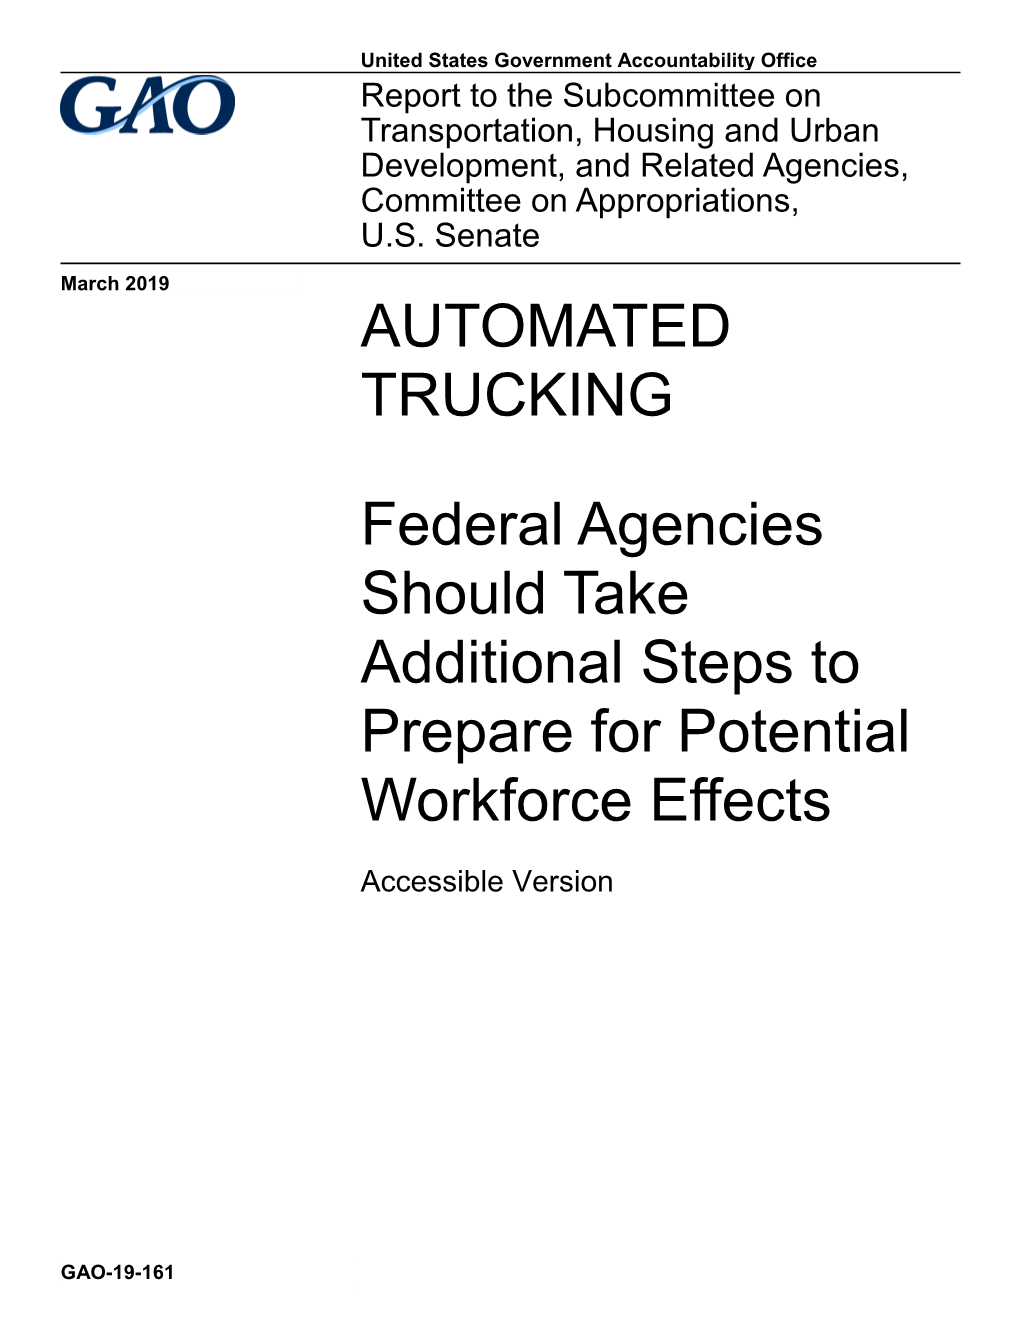 GAO-19-161, Accessible Version, AUTOMATED TRUCKING: Federal